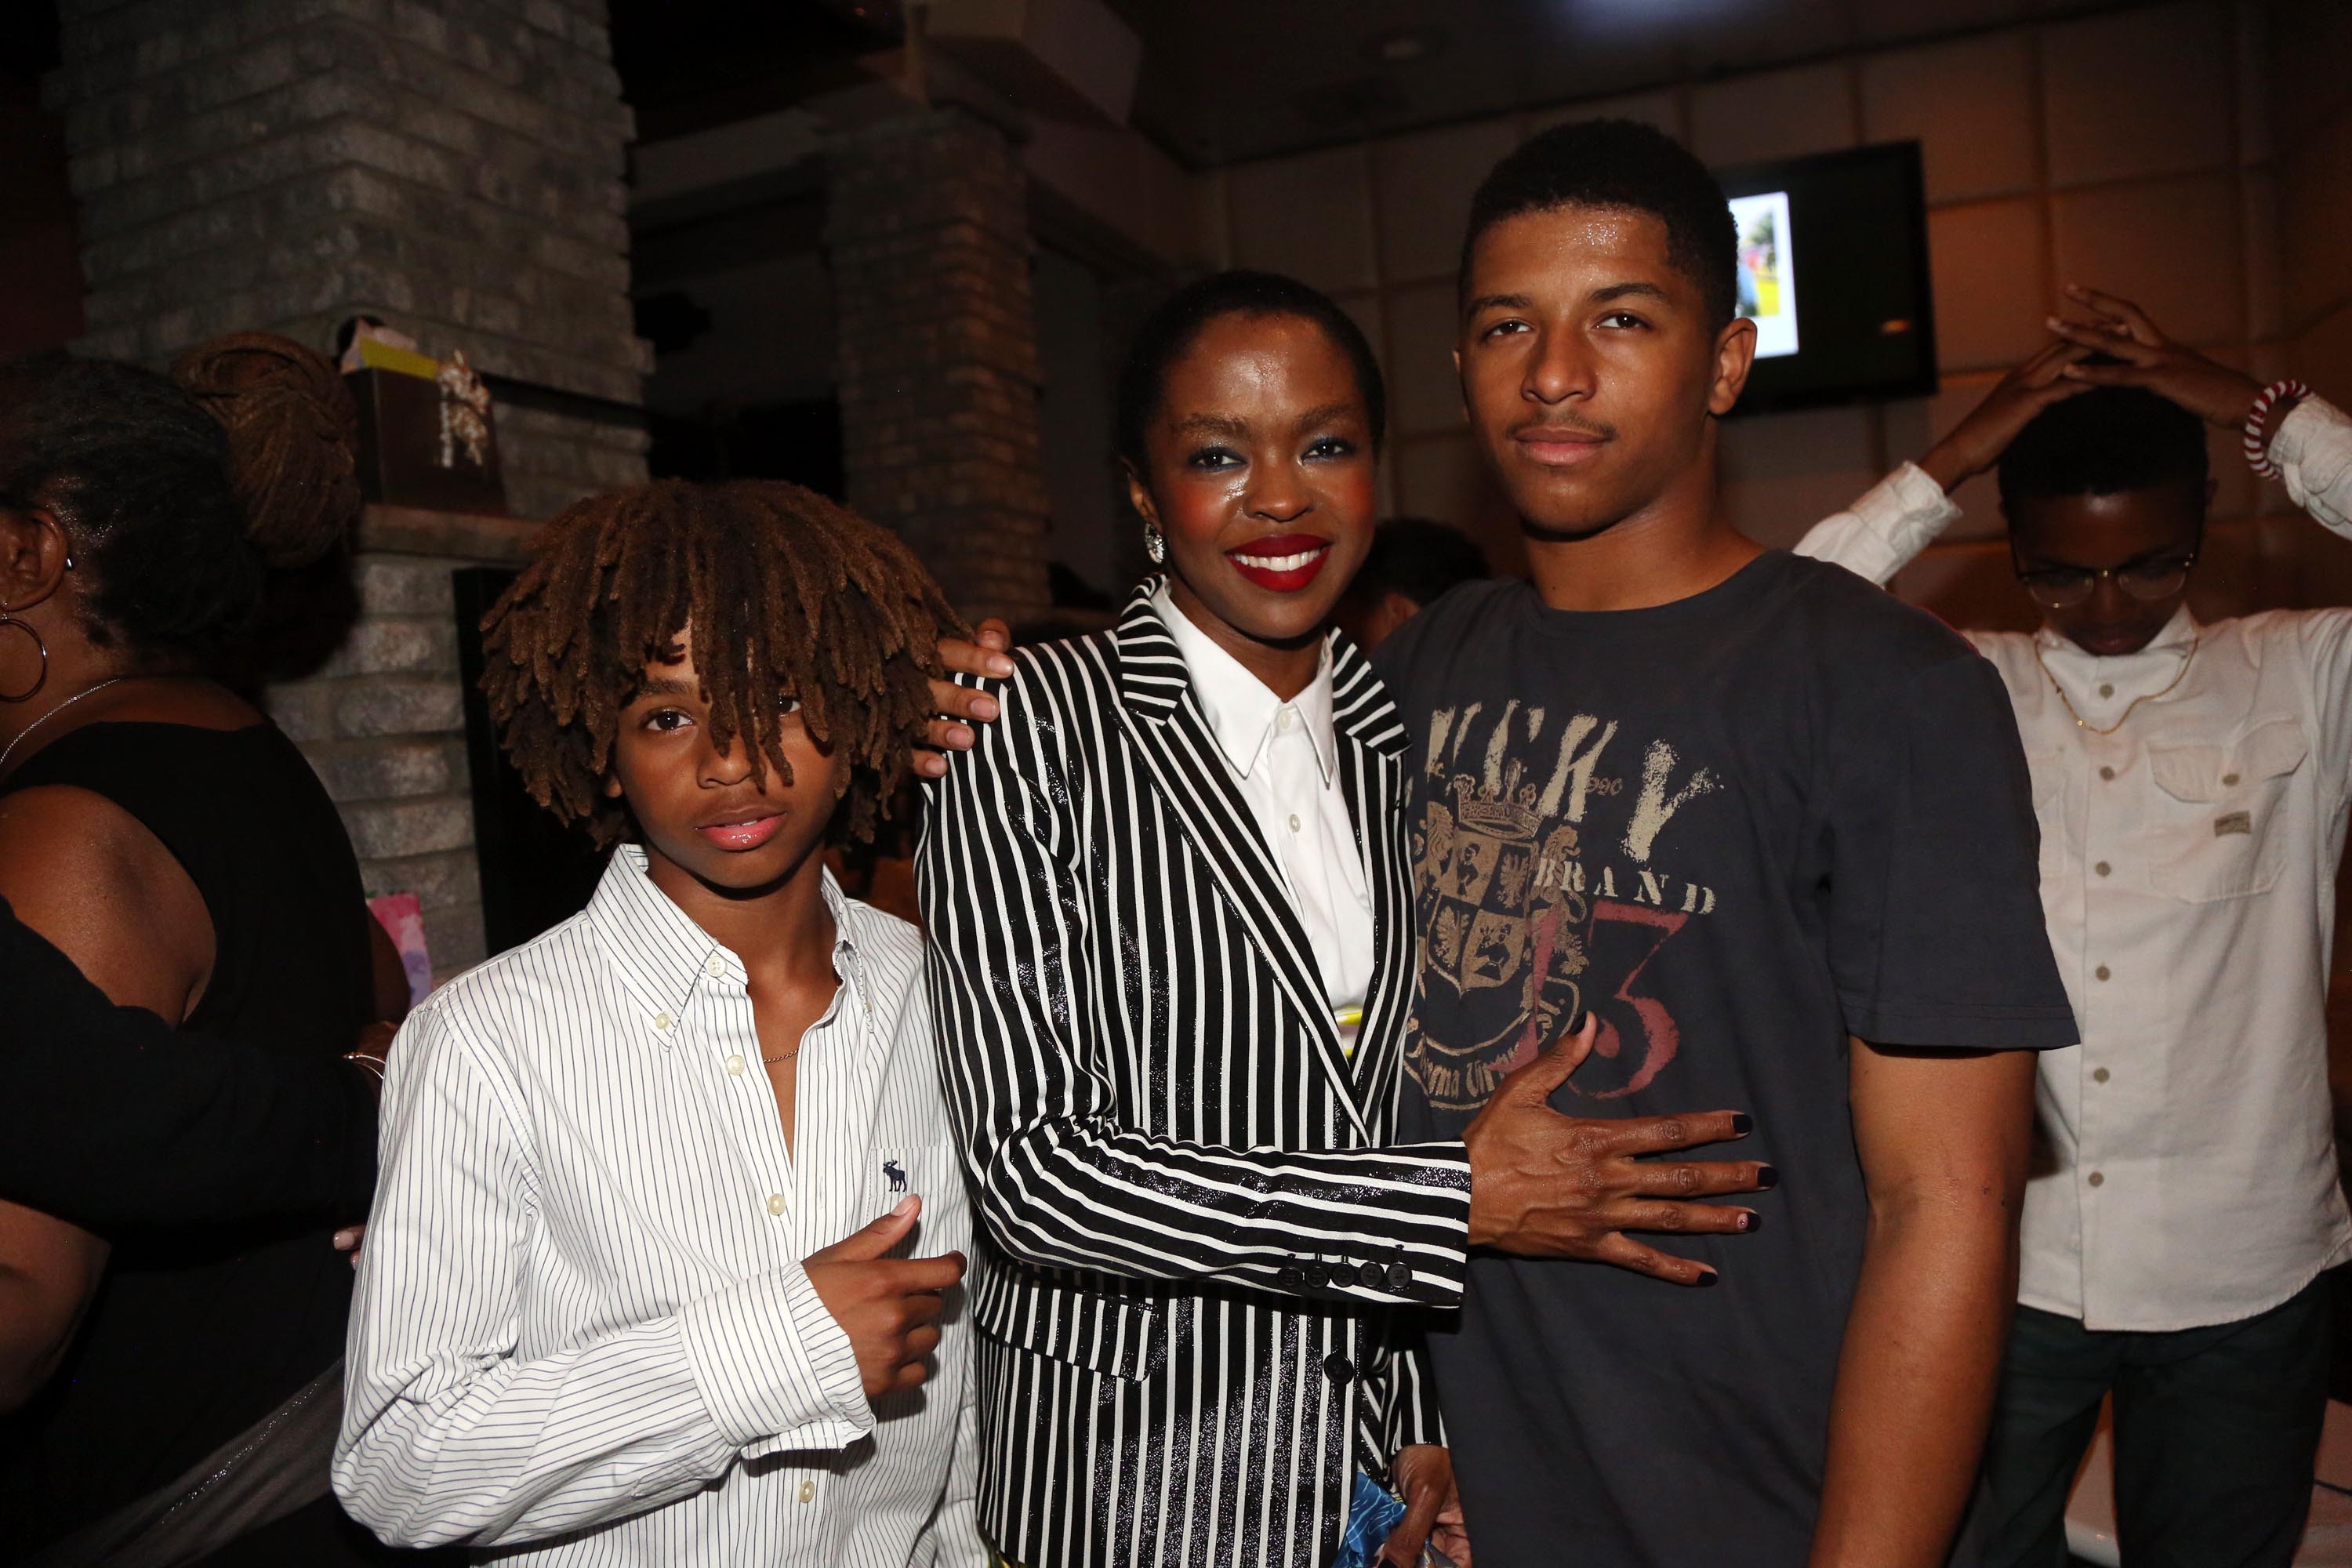 LOOK Lauryn Hill’s First Born (Yes, Zion) A Dad 93.1 WZAK